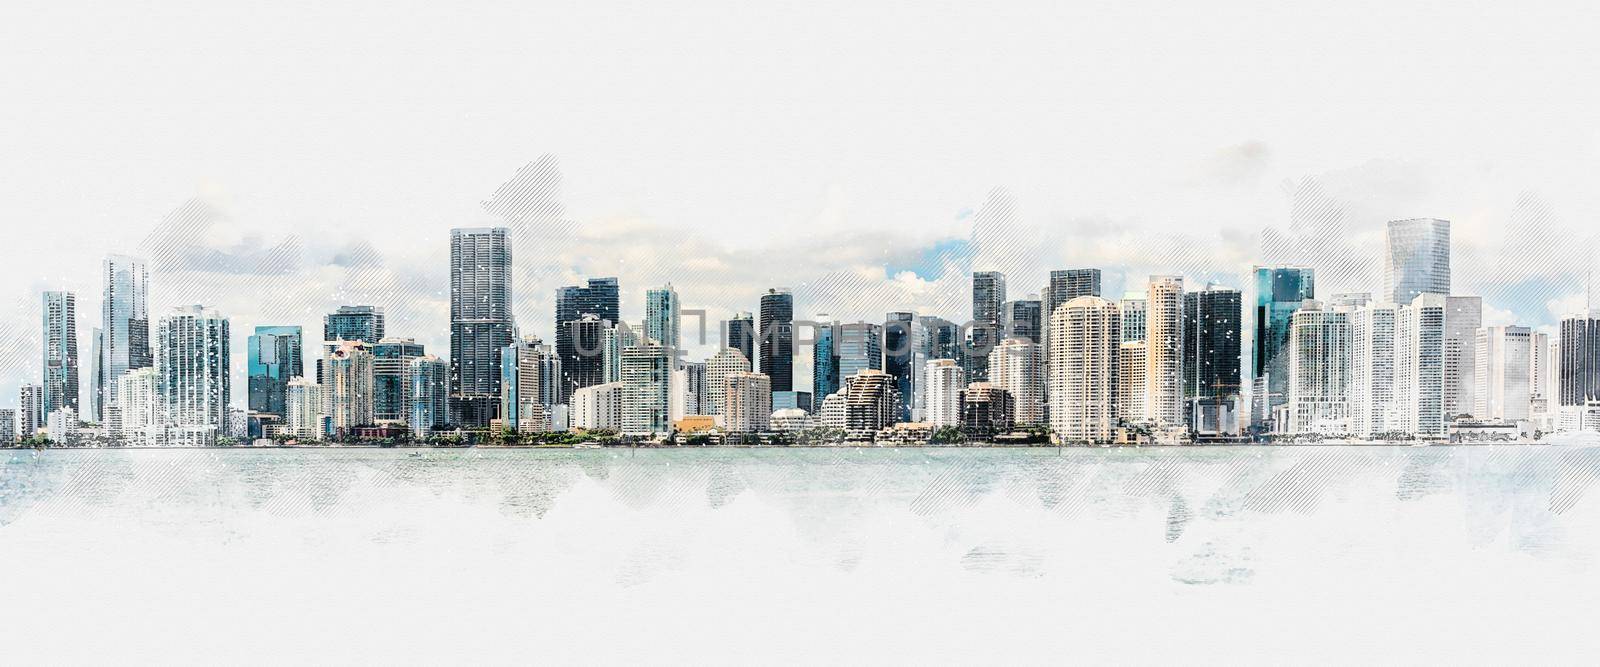 Digital watercolor painting of Miami skyline with skyscrapers by Mariakray